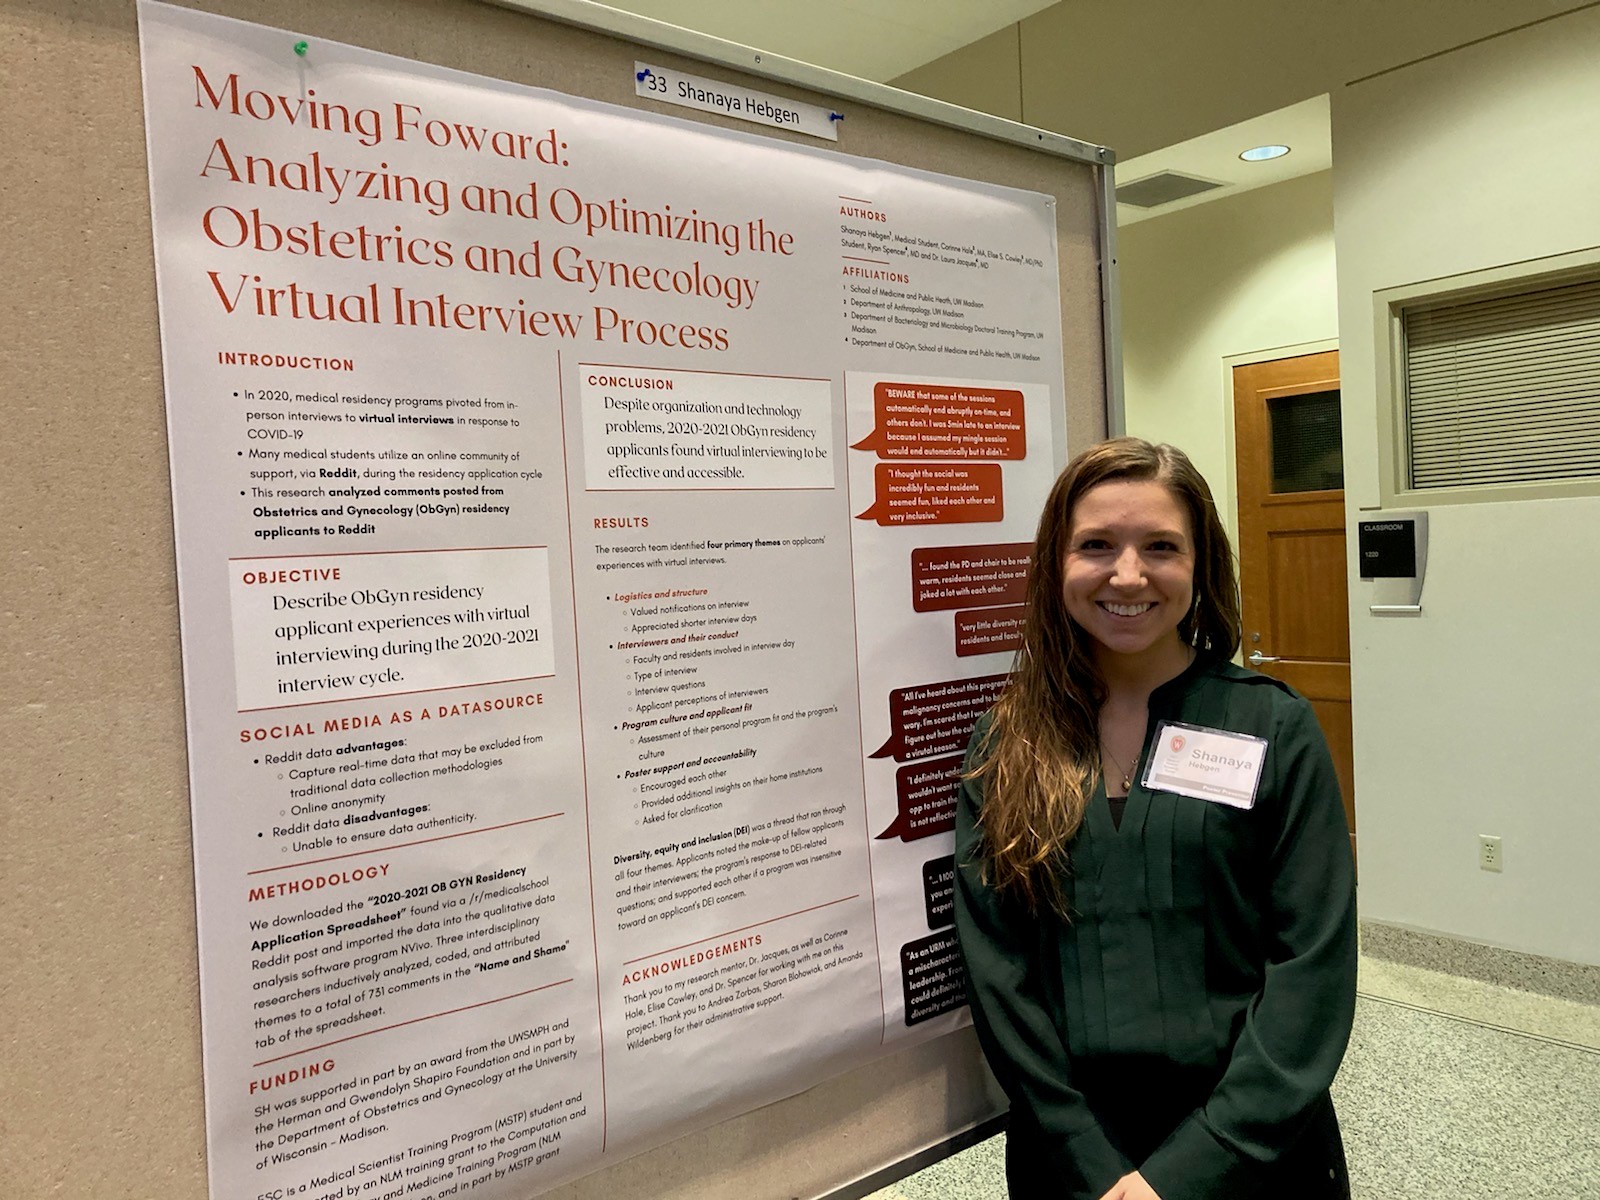 Congratulations to Shanaya Hebgen for presenting at the Shapiro Research Forum!